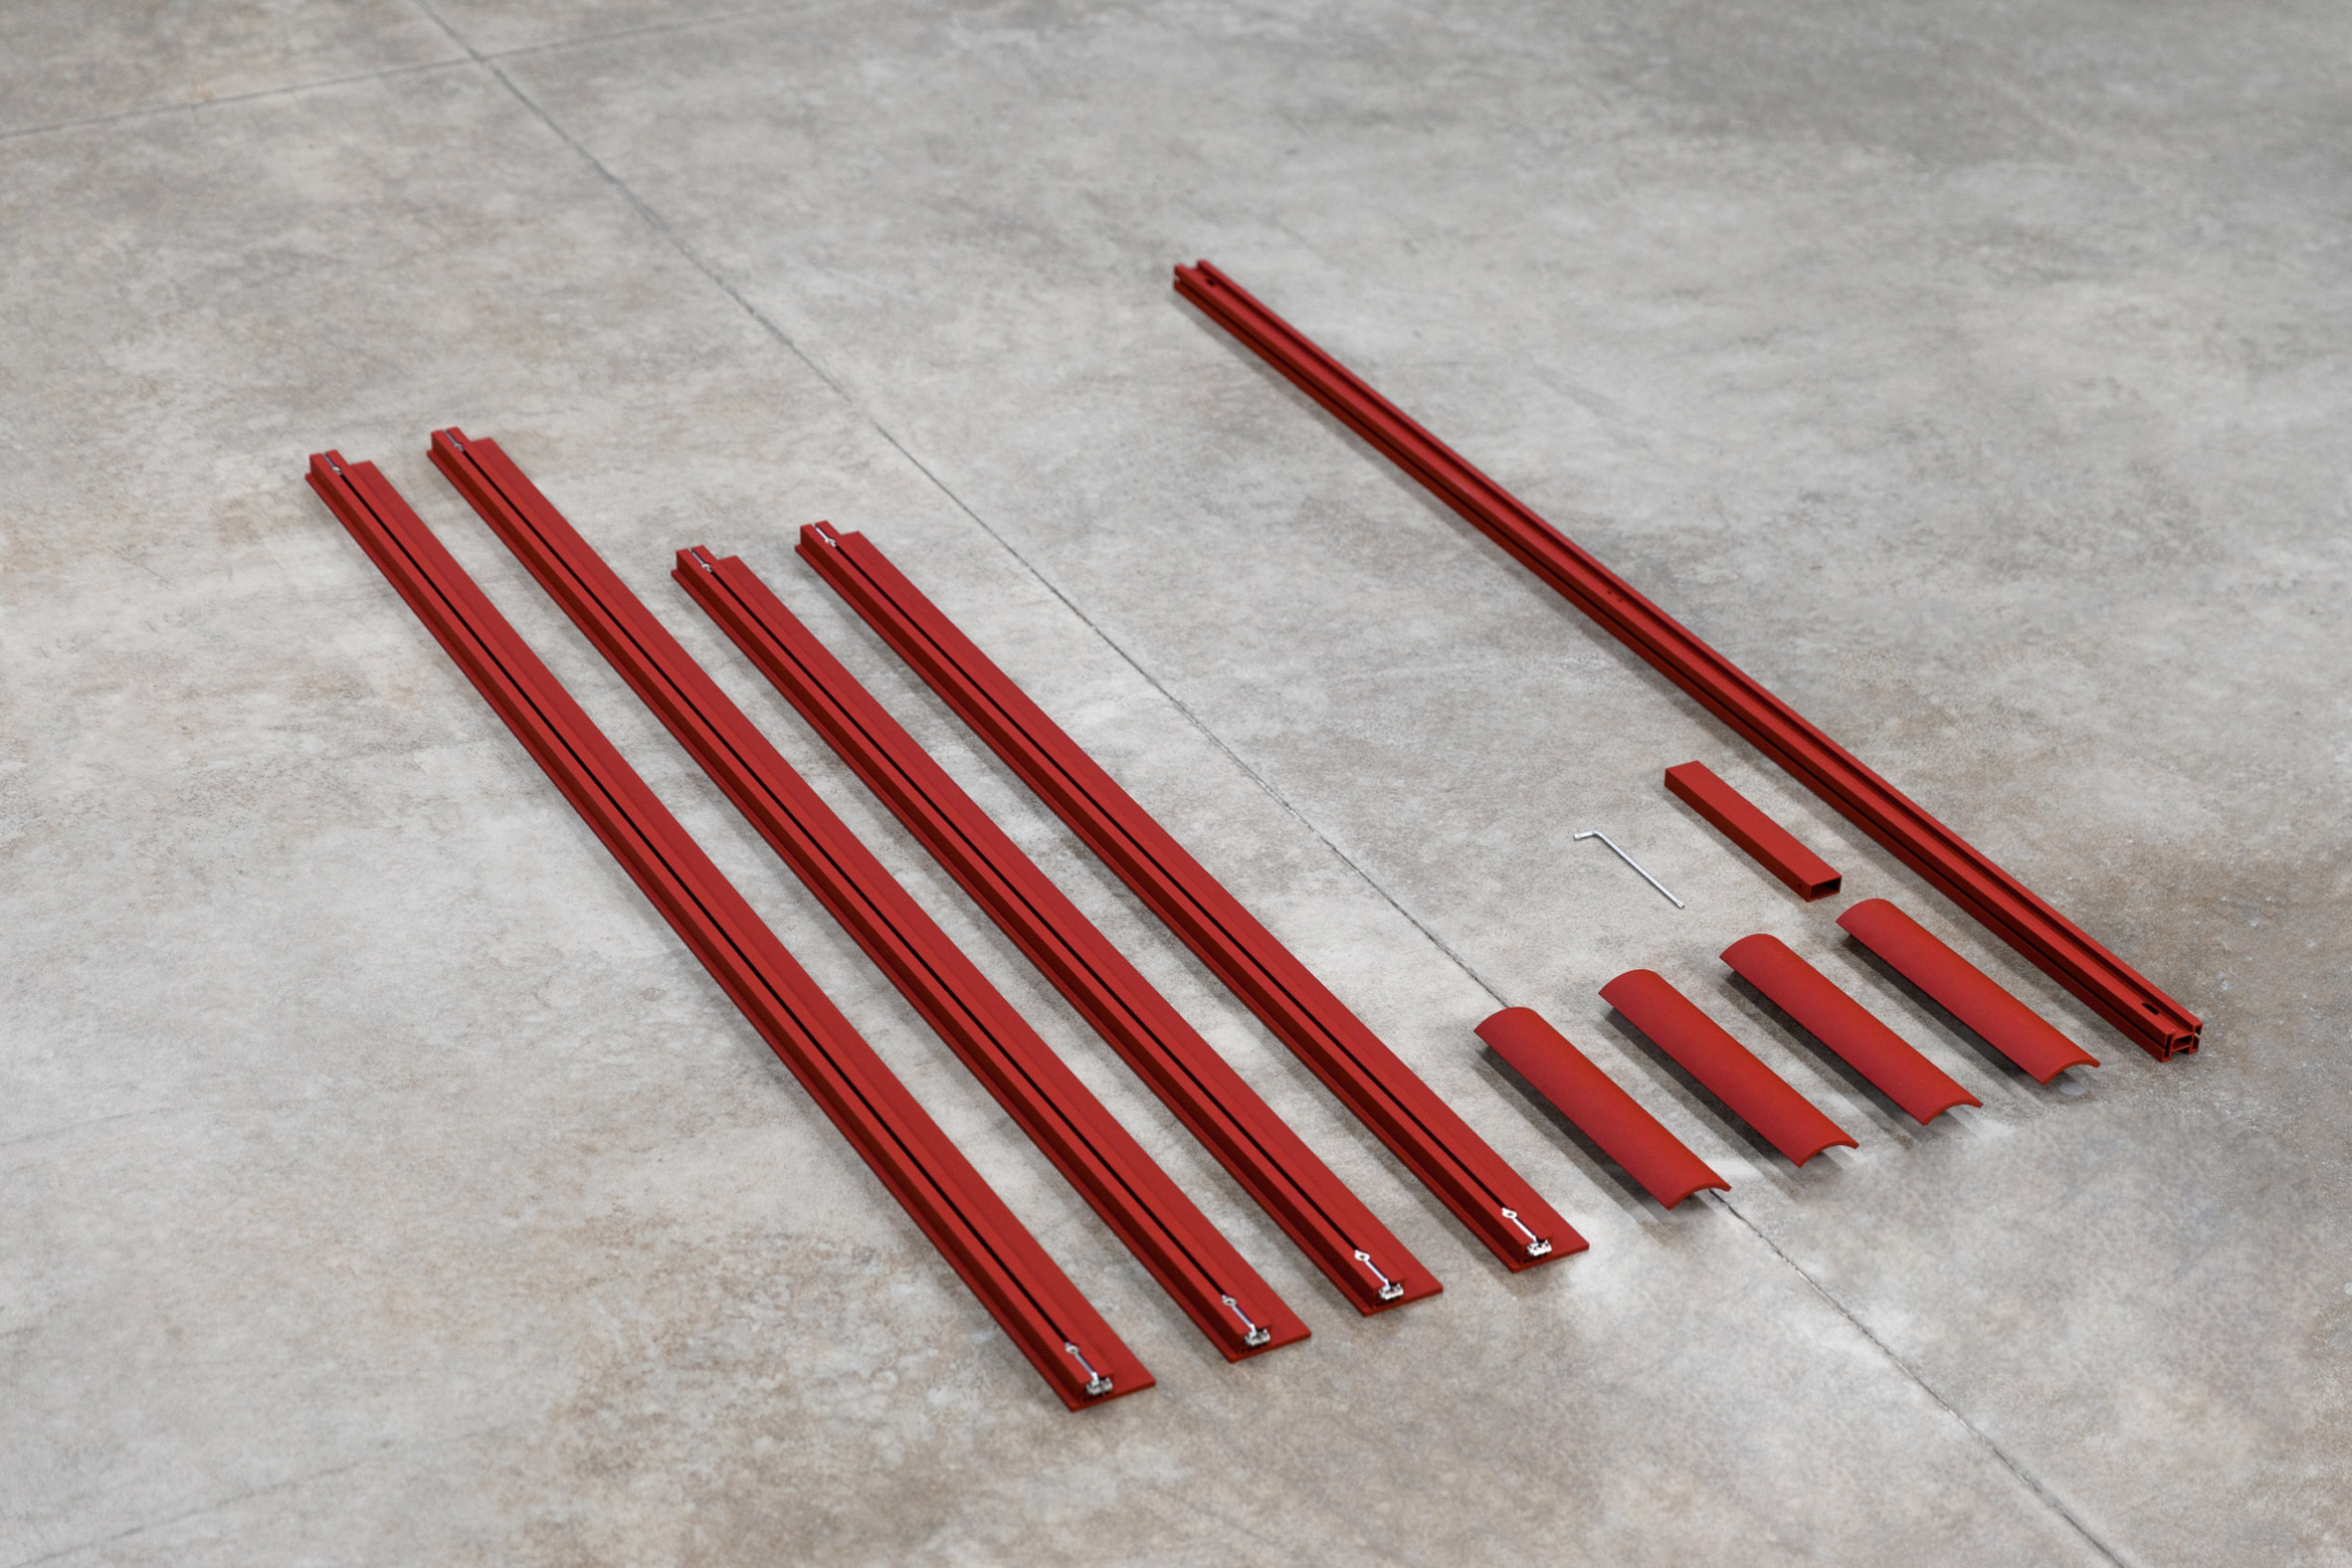 Photograph of ten pieces of red aluminium and a tool